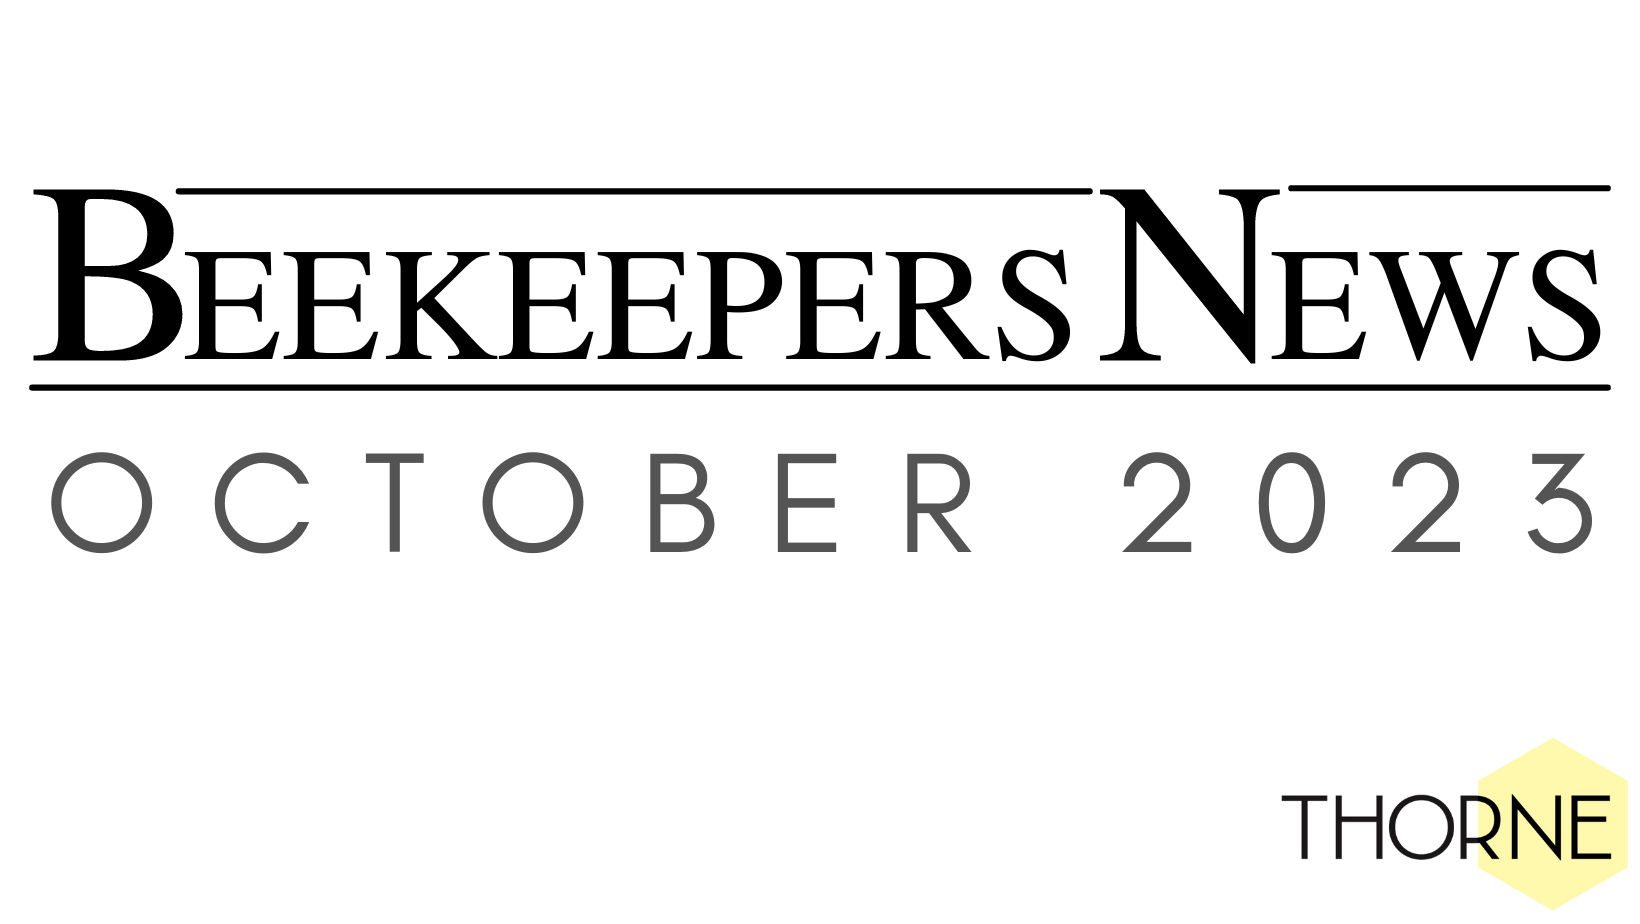 Beekeepers News - October - Issue 85